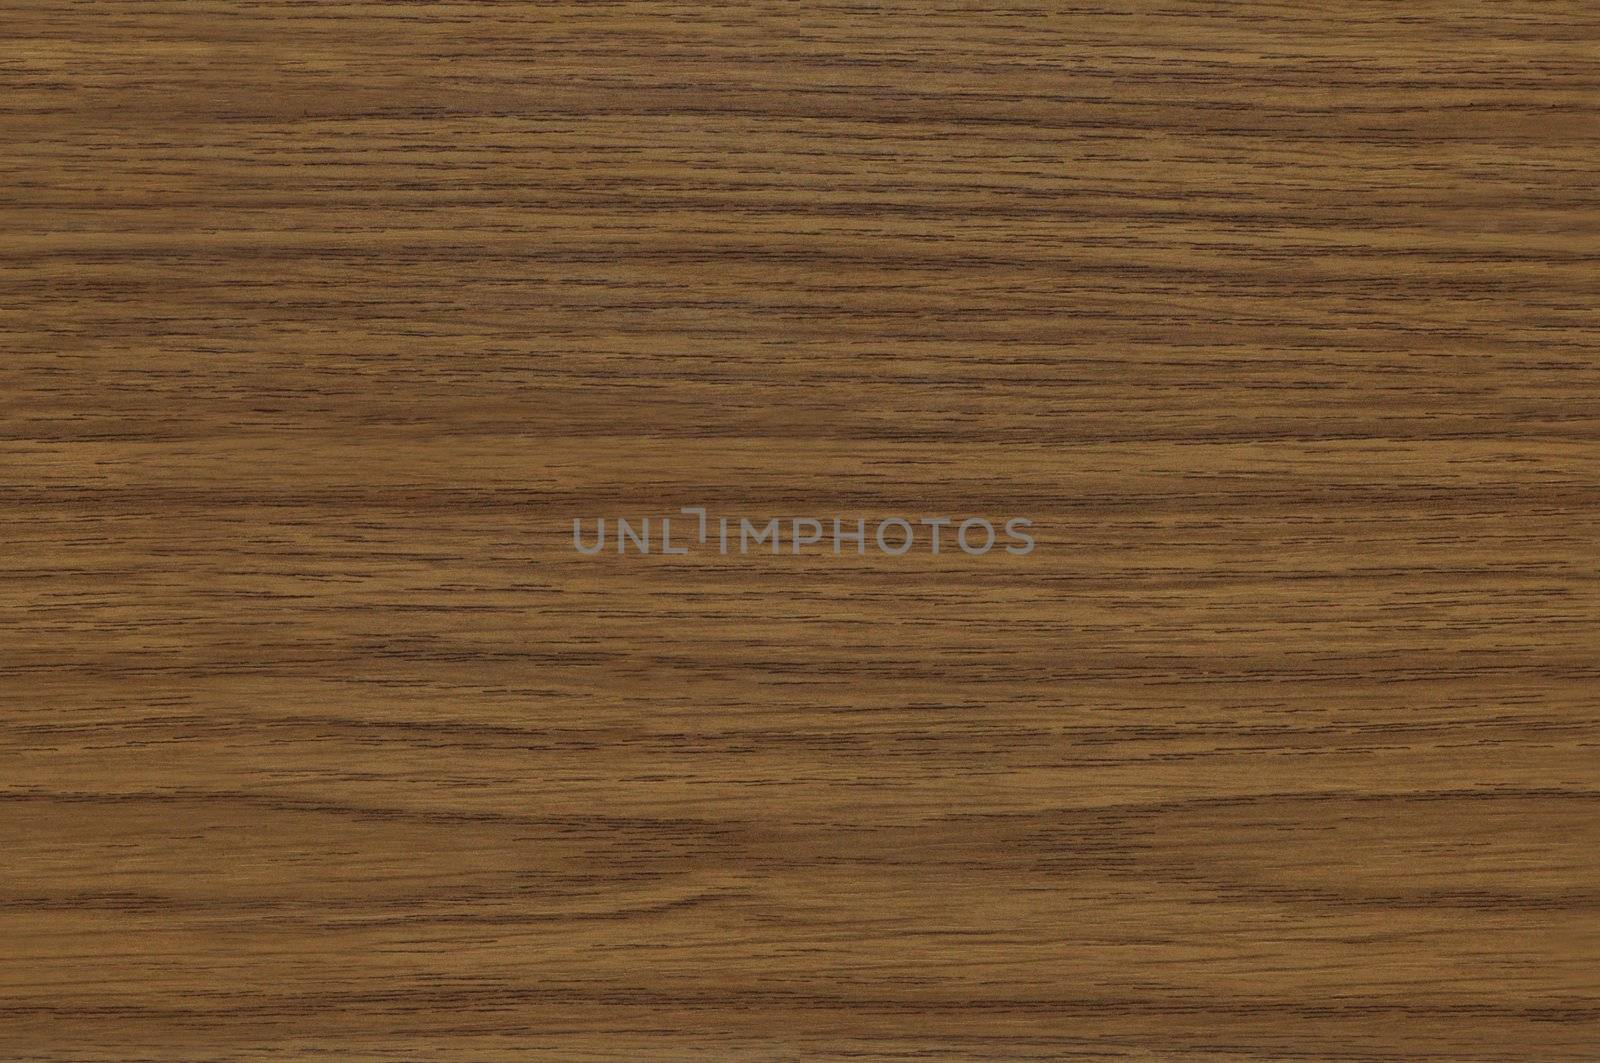 Wood texture that perfectly loop horizontally and vertically